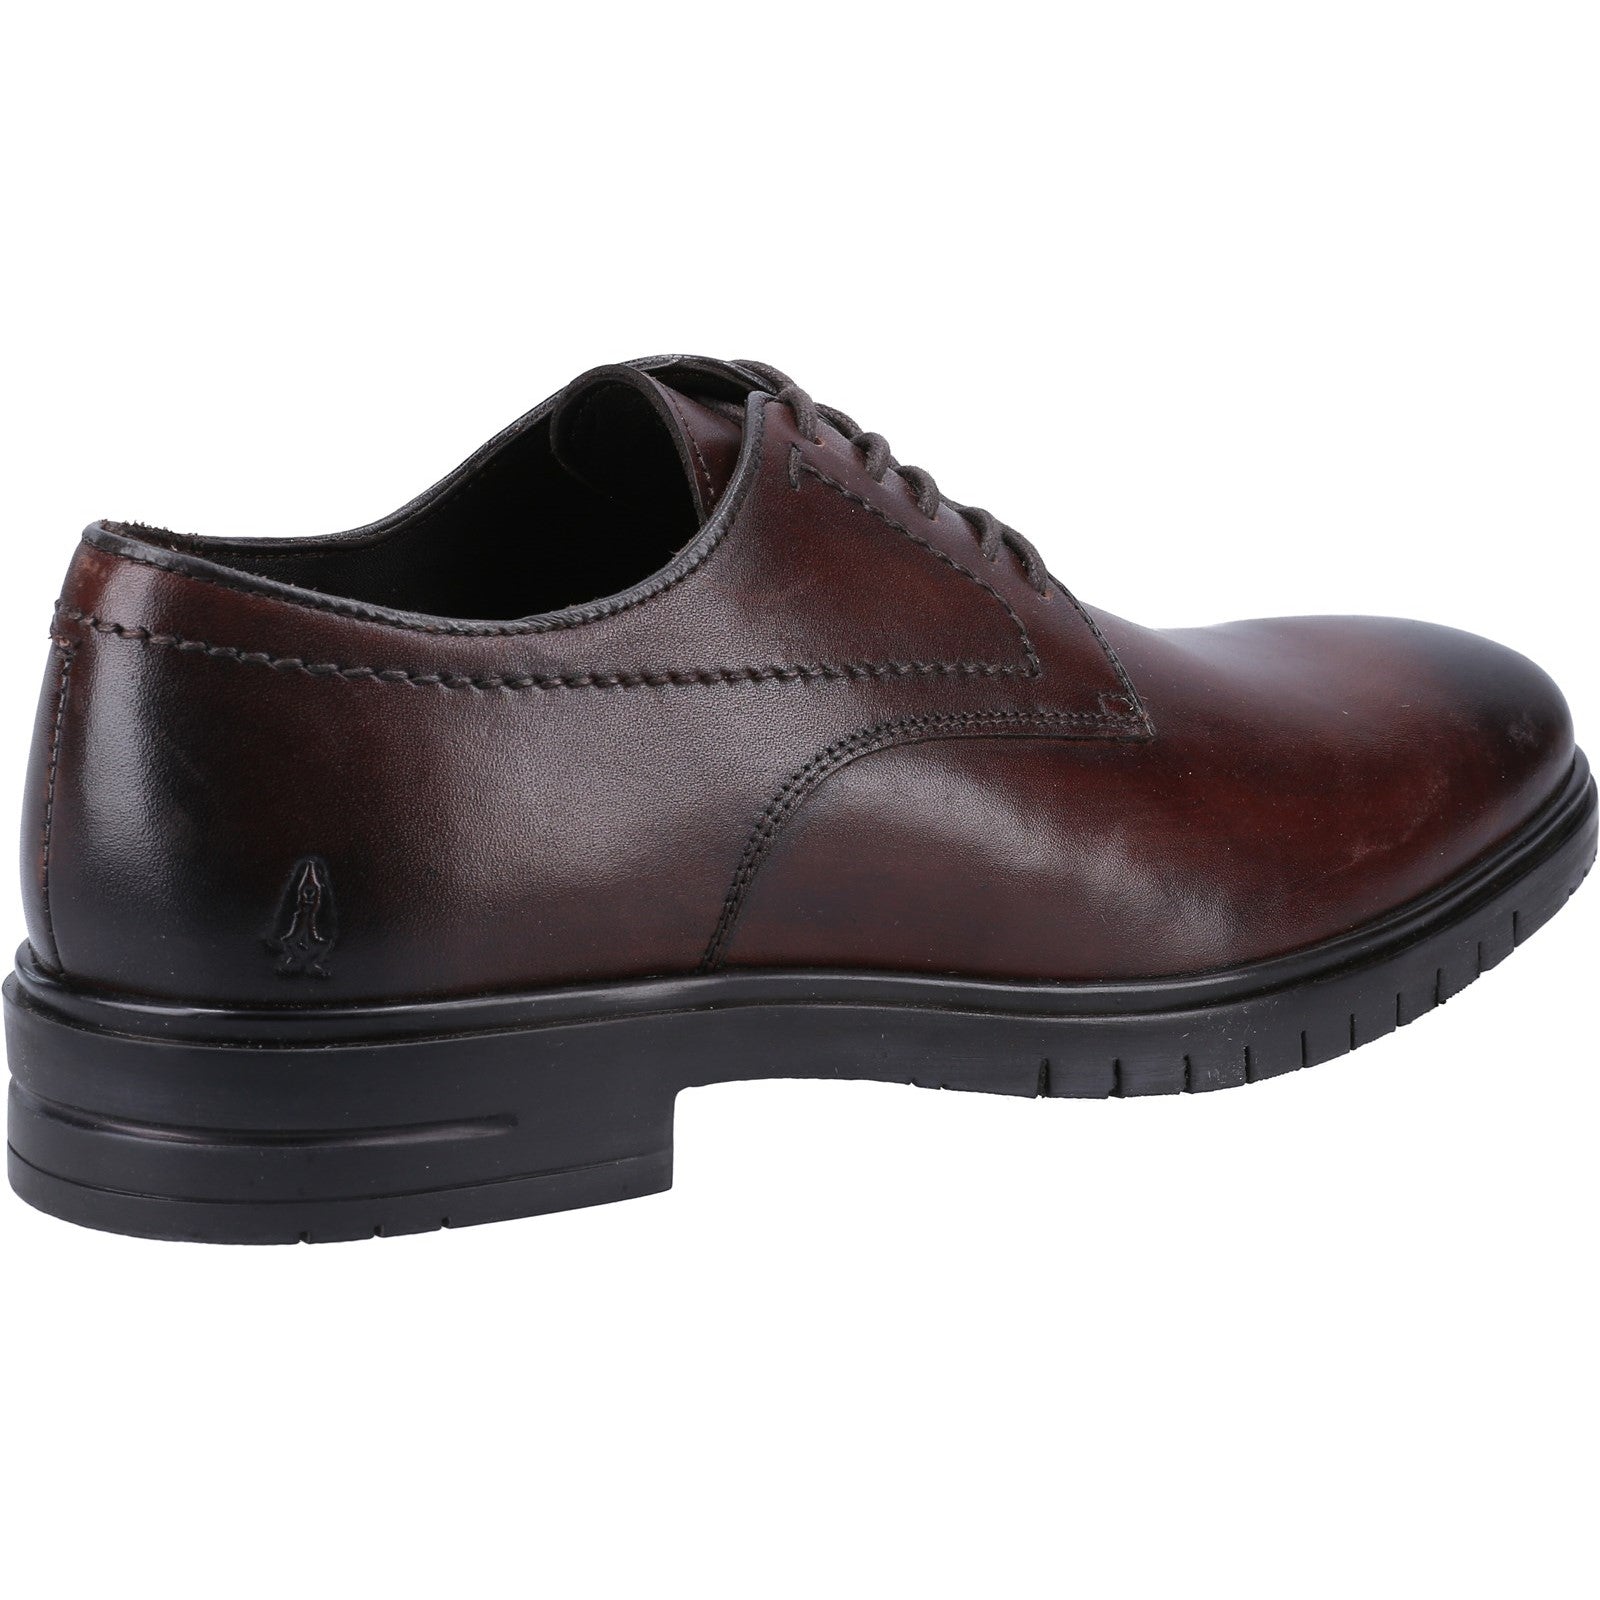 Hush Puppies Mens Sterling Leather Shoes - Brown